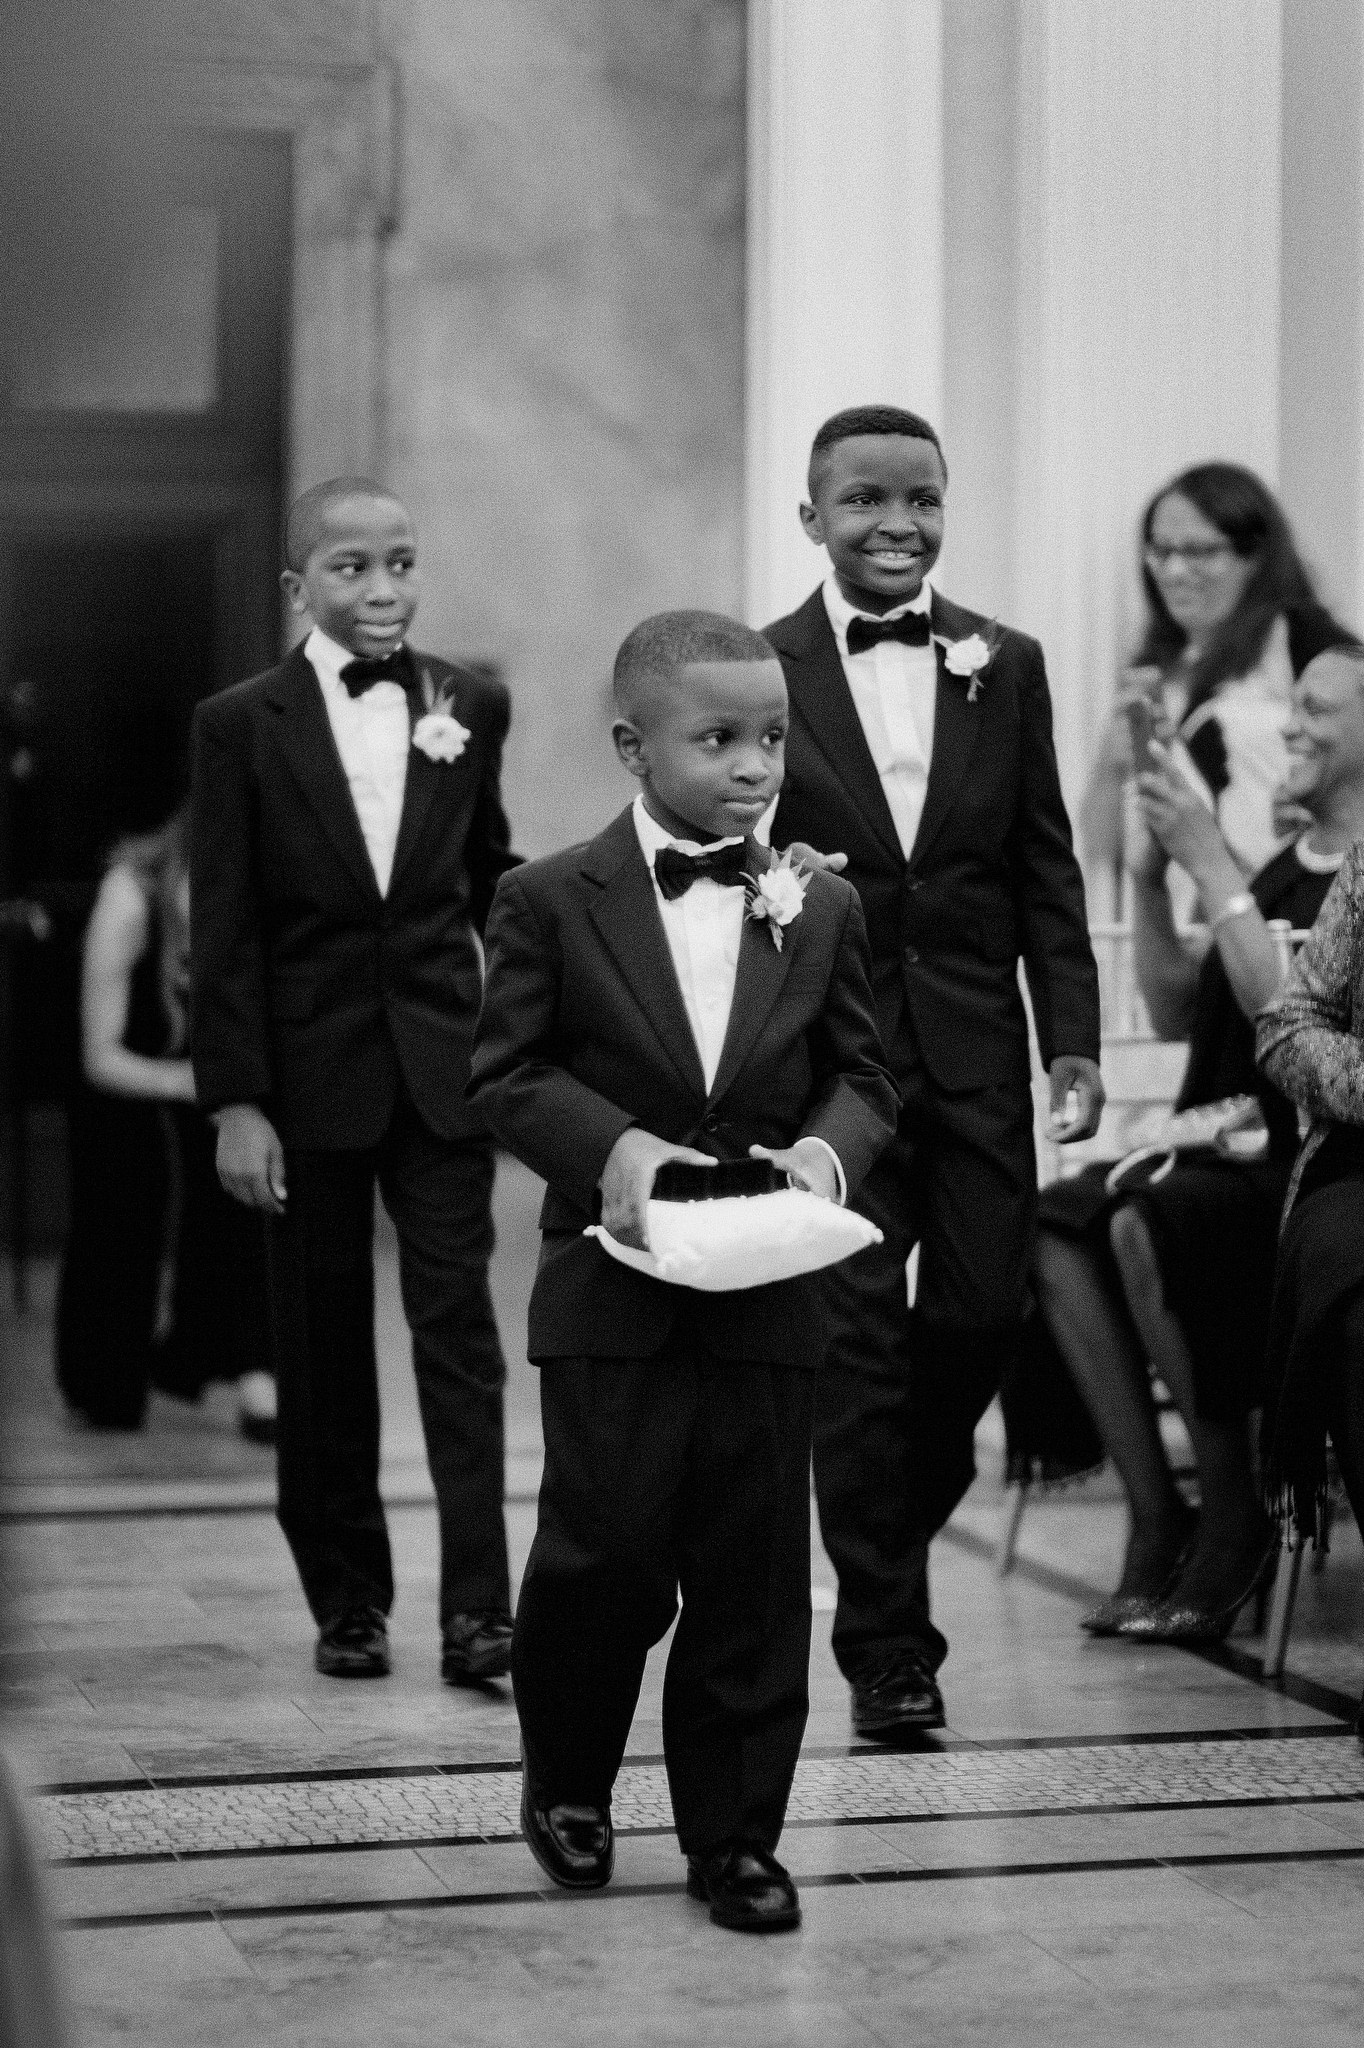 Three young boys in suits walking down the aisle, ring bearer in front at wedding